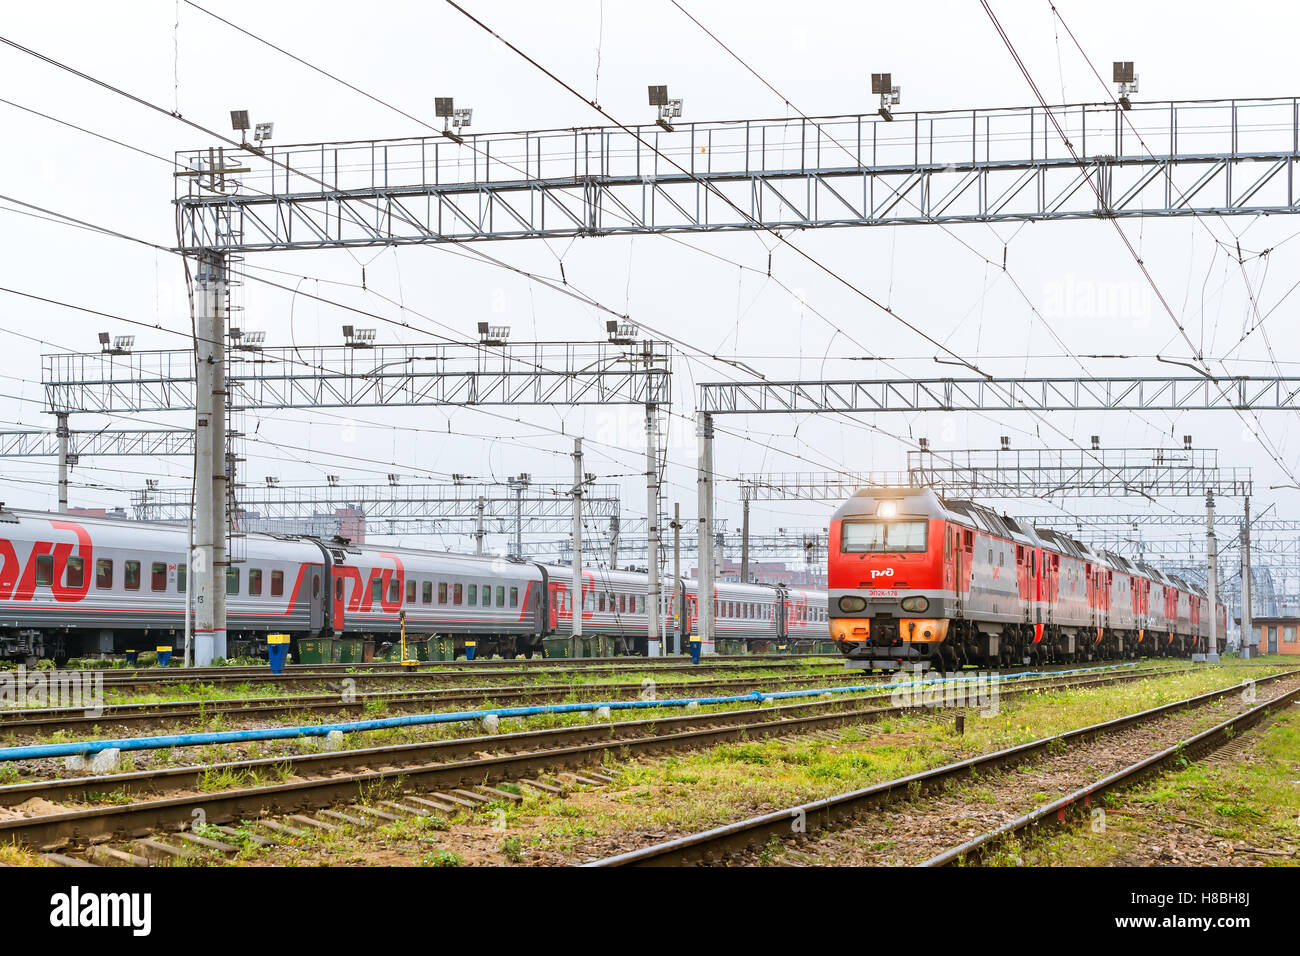 Saint-Petersburg, Russia - September 28, 2016: Old locomotiv and railcars rzd stand on railroad tracks of technical railway depo Stock Photo